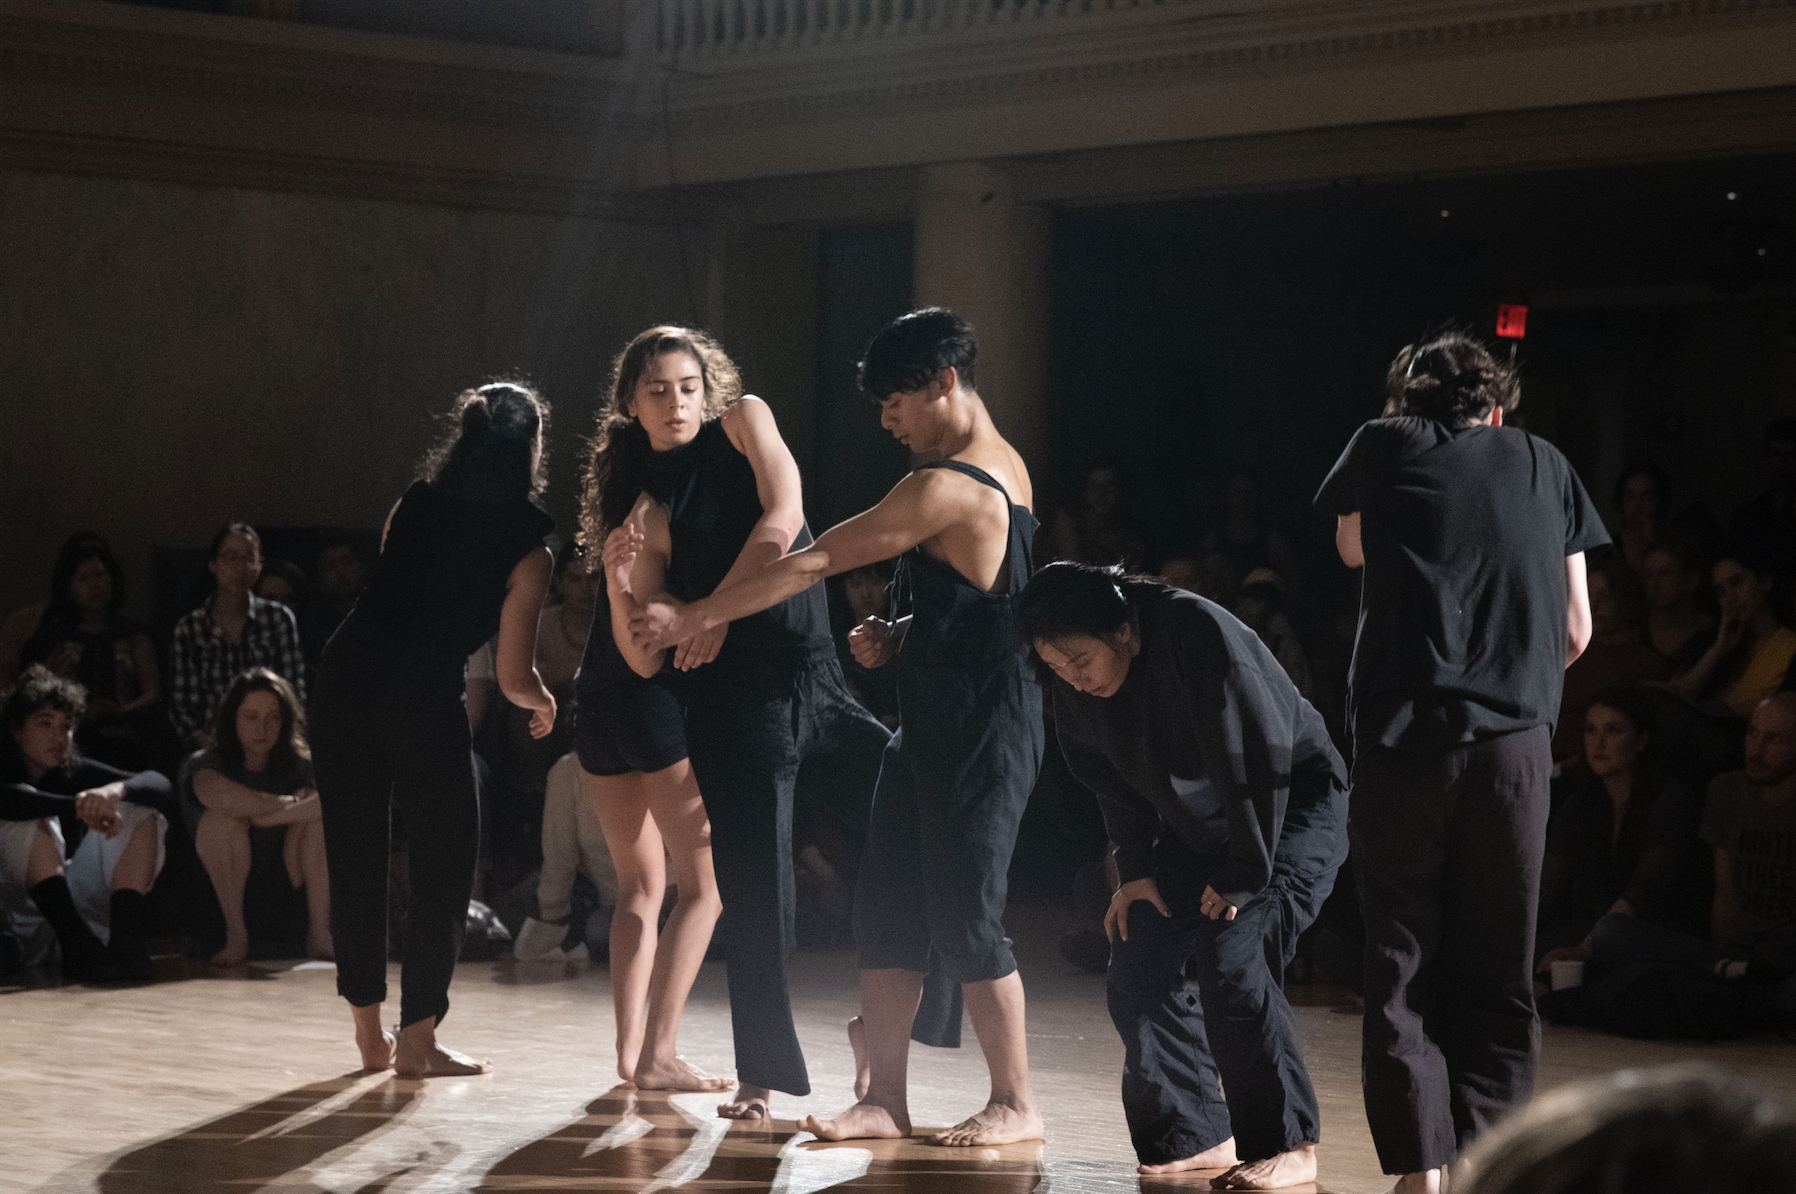 Left to Right: Esther Manon Siddiquie, Sarah Amores, Maxine Flasher-Duzgunes, Nikkie Samreth, NiNi Dongnier, Isaac Spector / Photo by Sebastian Morales